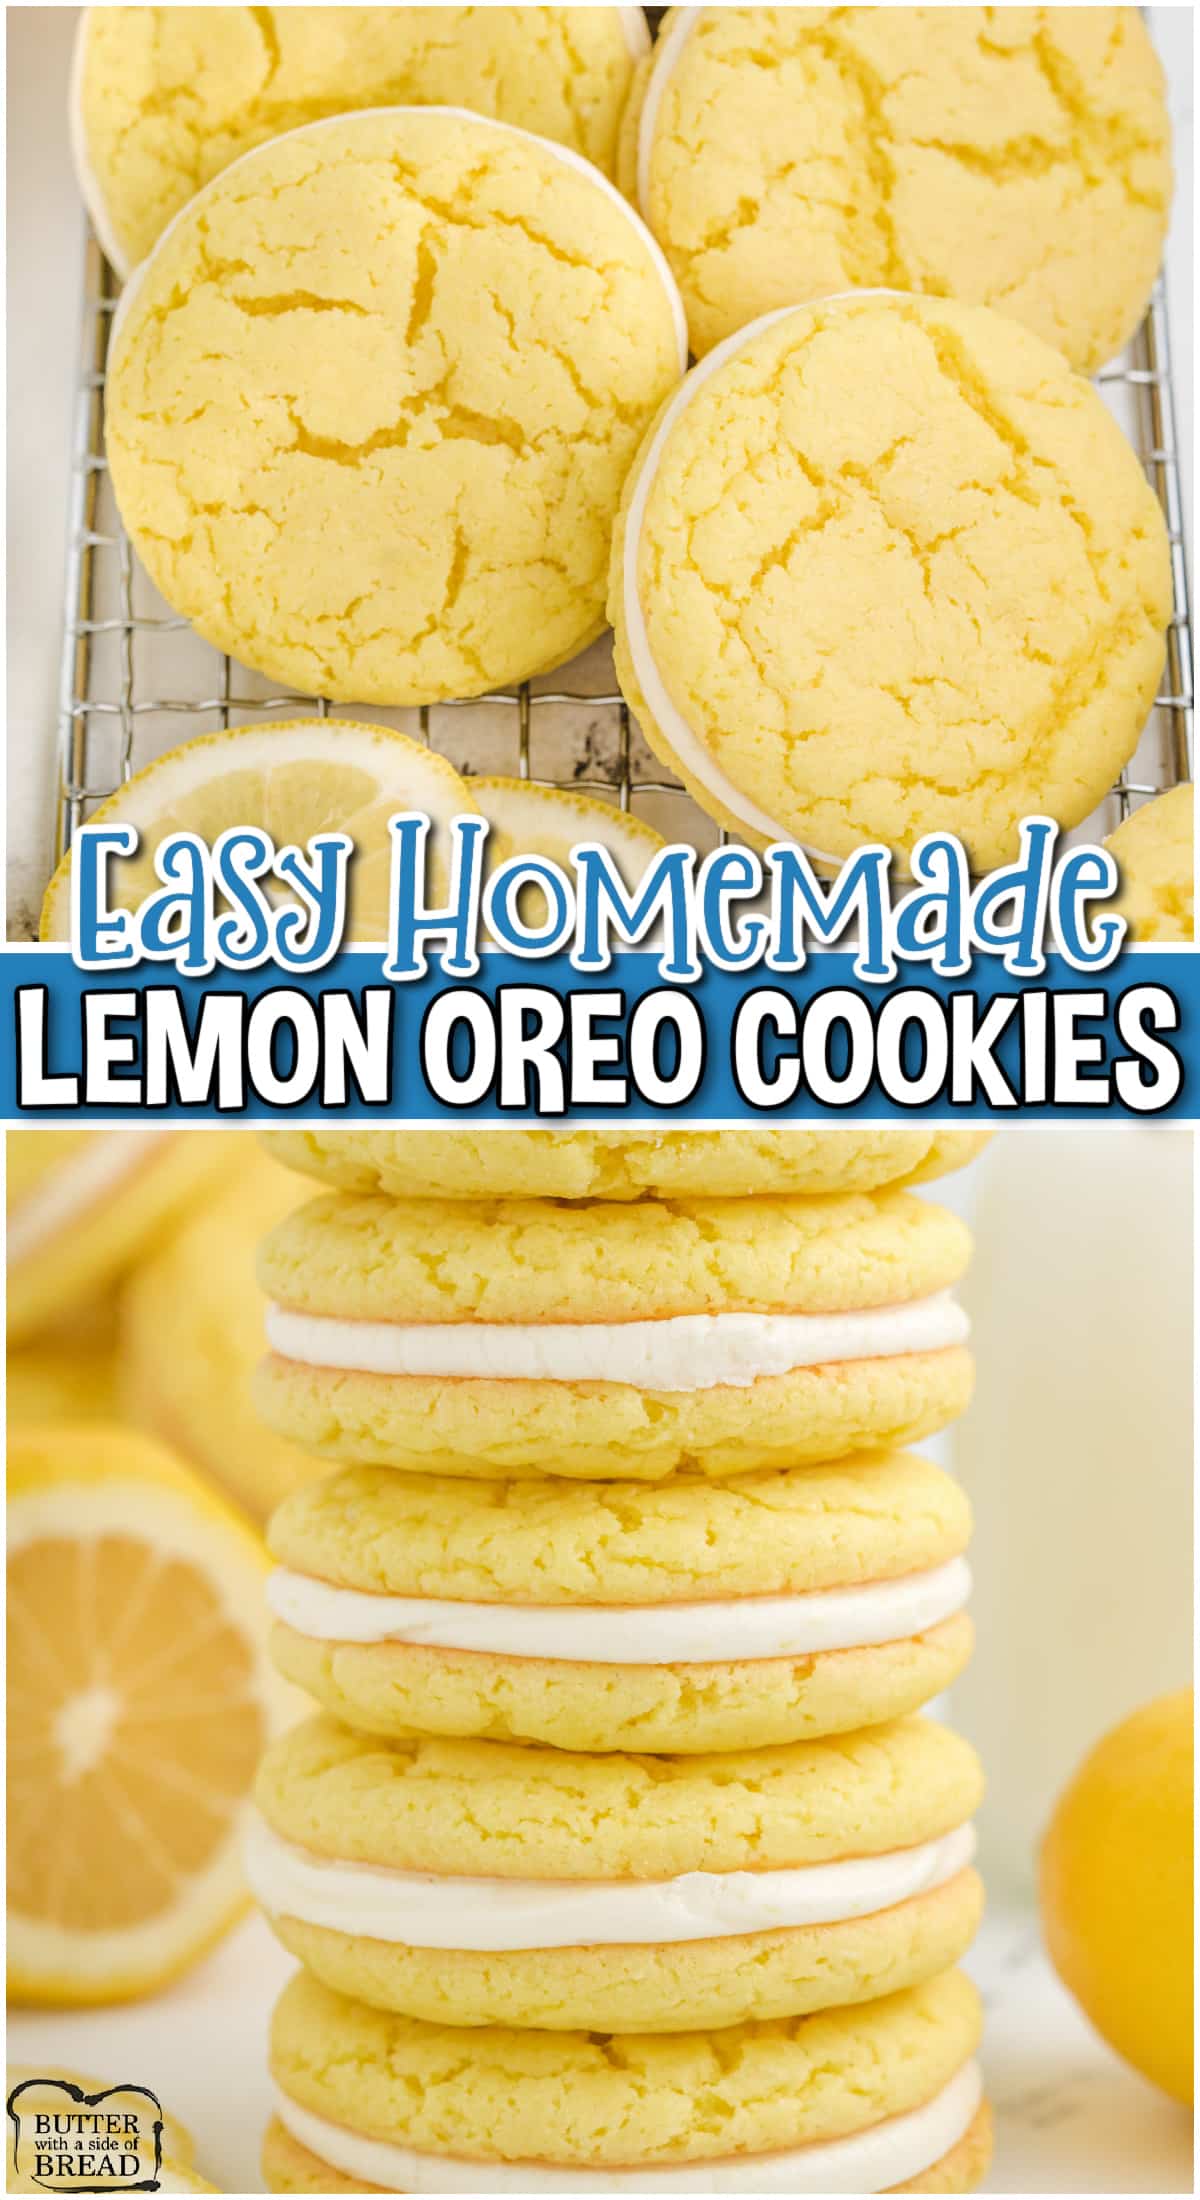 Cake Mix Lemon Oreo Cookies made easy with a handful of ingredients & sandwiched with a delightful lemon cream cheese filling! They're a delicious and unique twist on the classic treat!